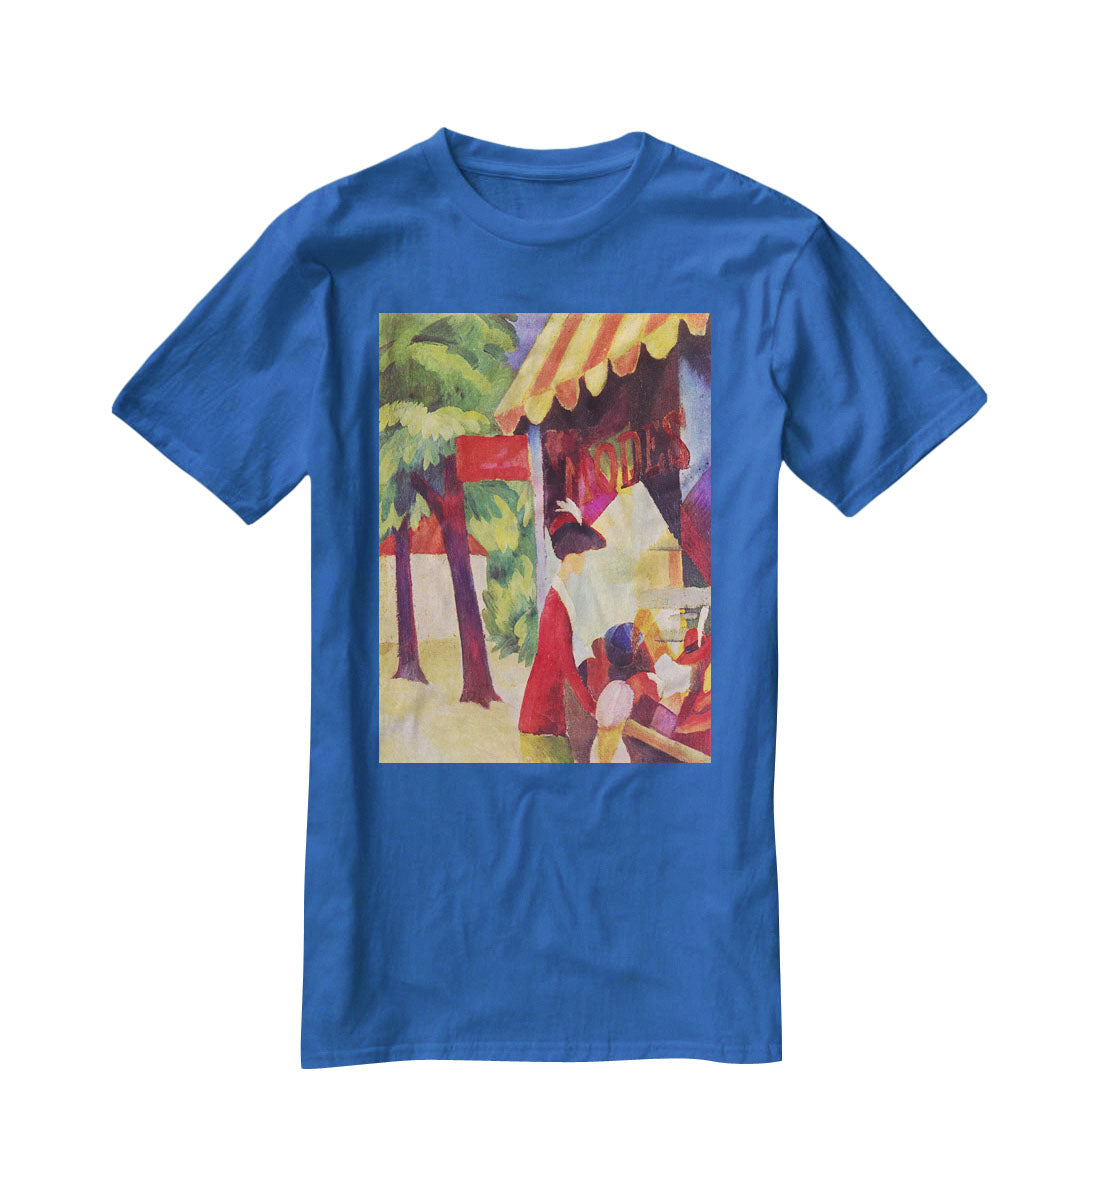 Before Hutladen woman with a red jacket and child by Macke T-Shirt - Canvas Art Rocks - 2